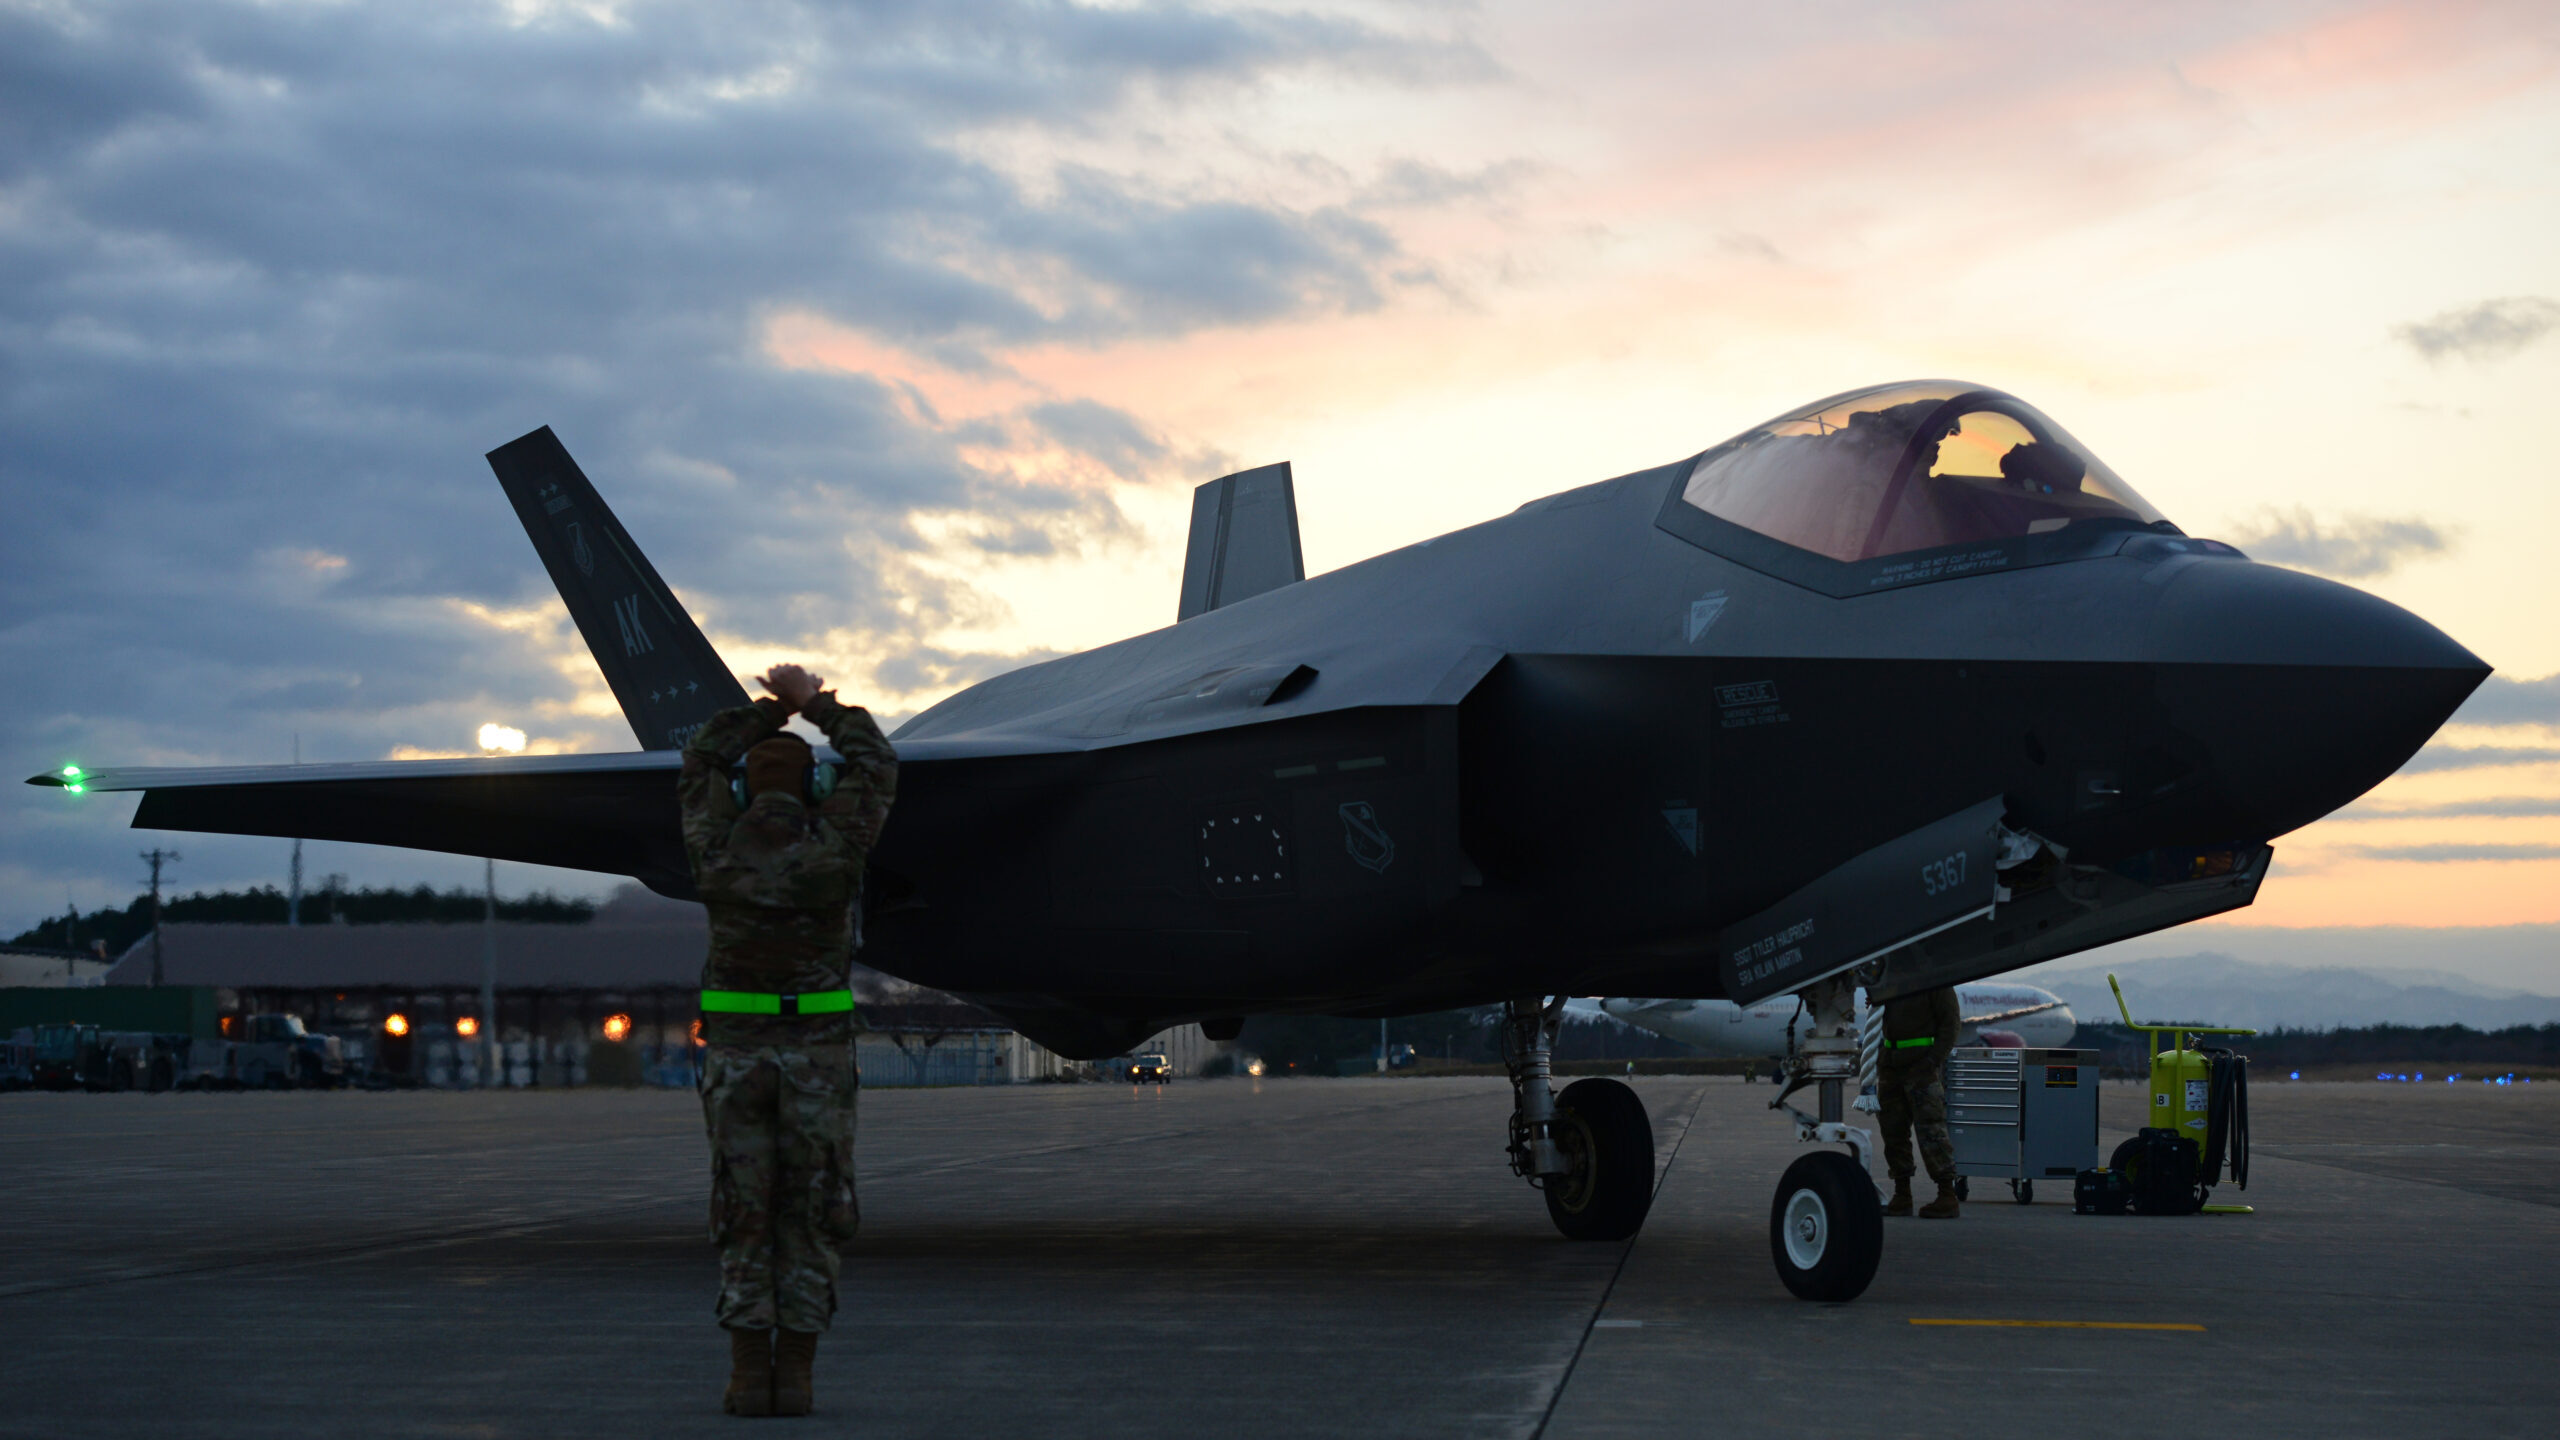 Only 55 percent of F-35s mission capable, putting depot work in